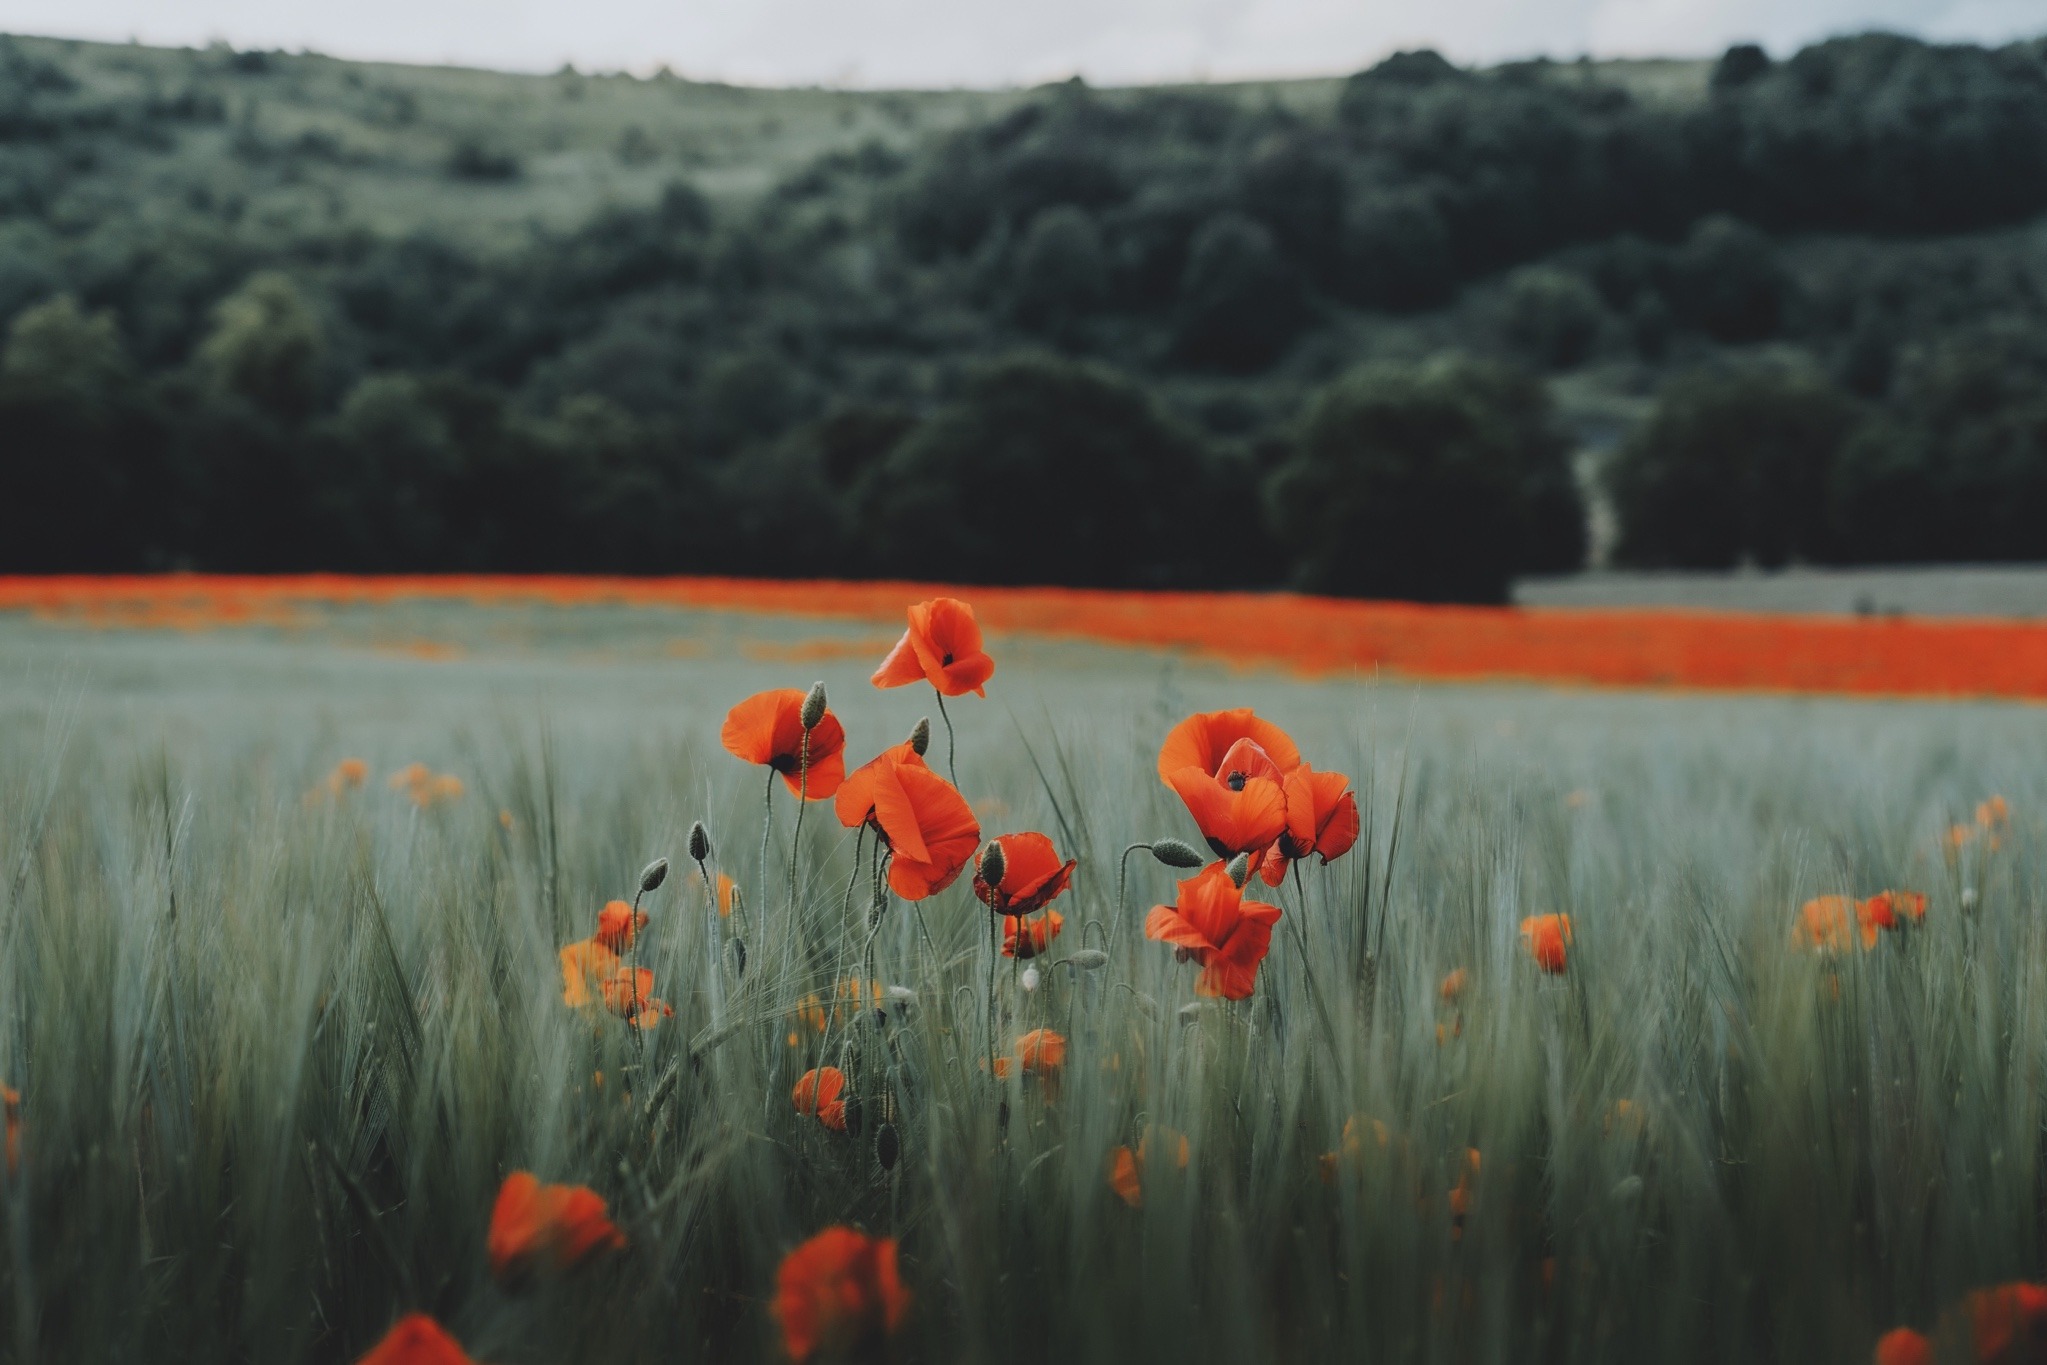 Flowers Nature Landscape Red Trees Forest Sky Field Grass Plants Photography Poppies 2047x1365